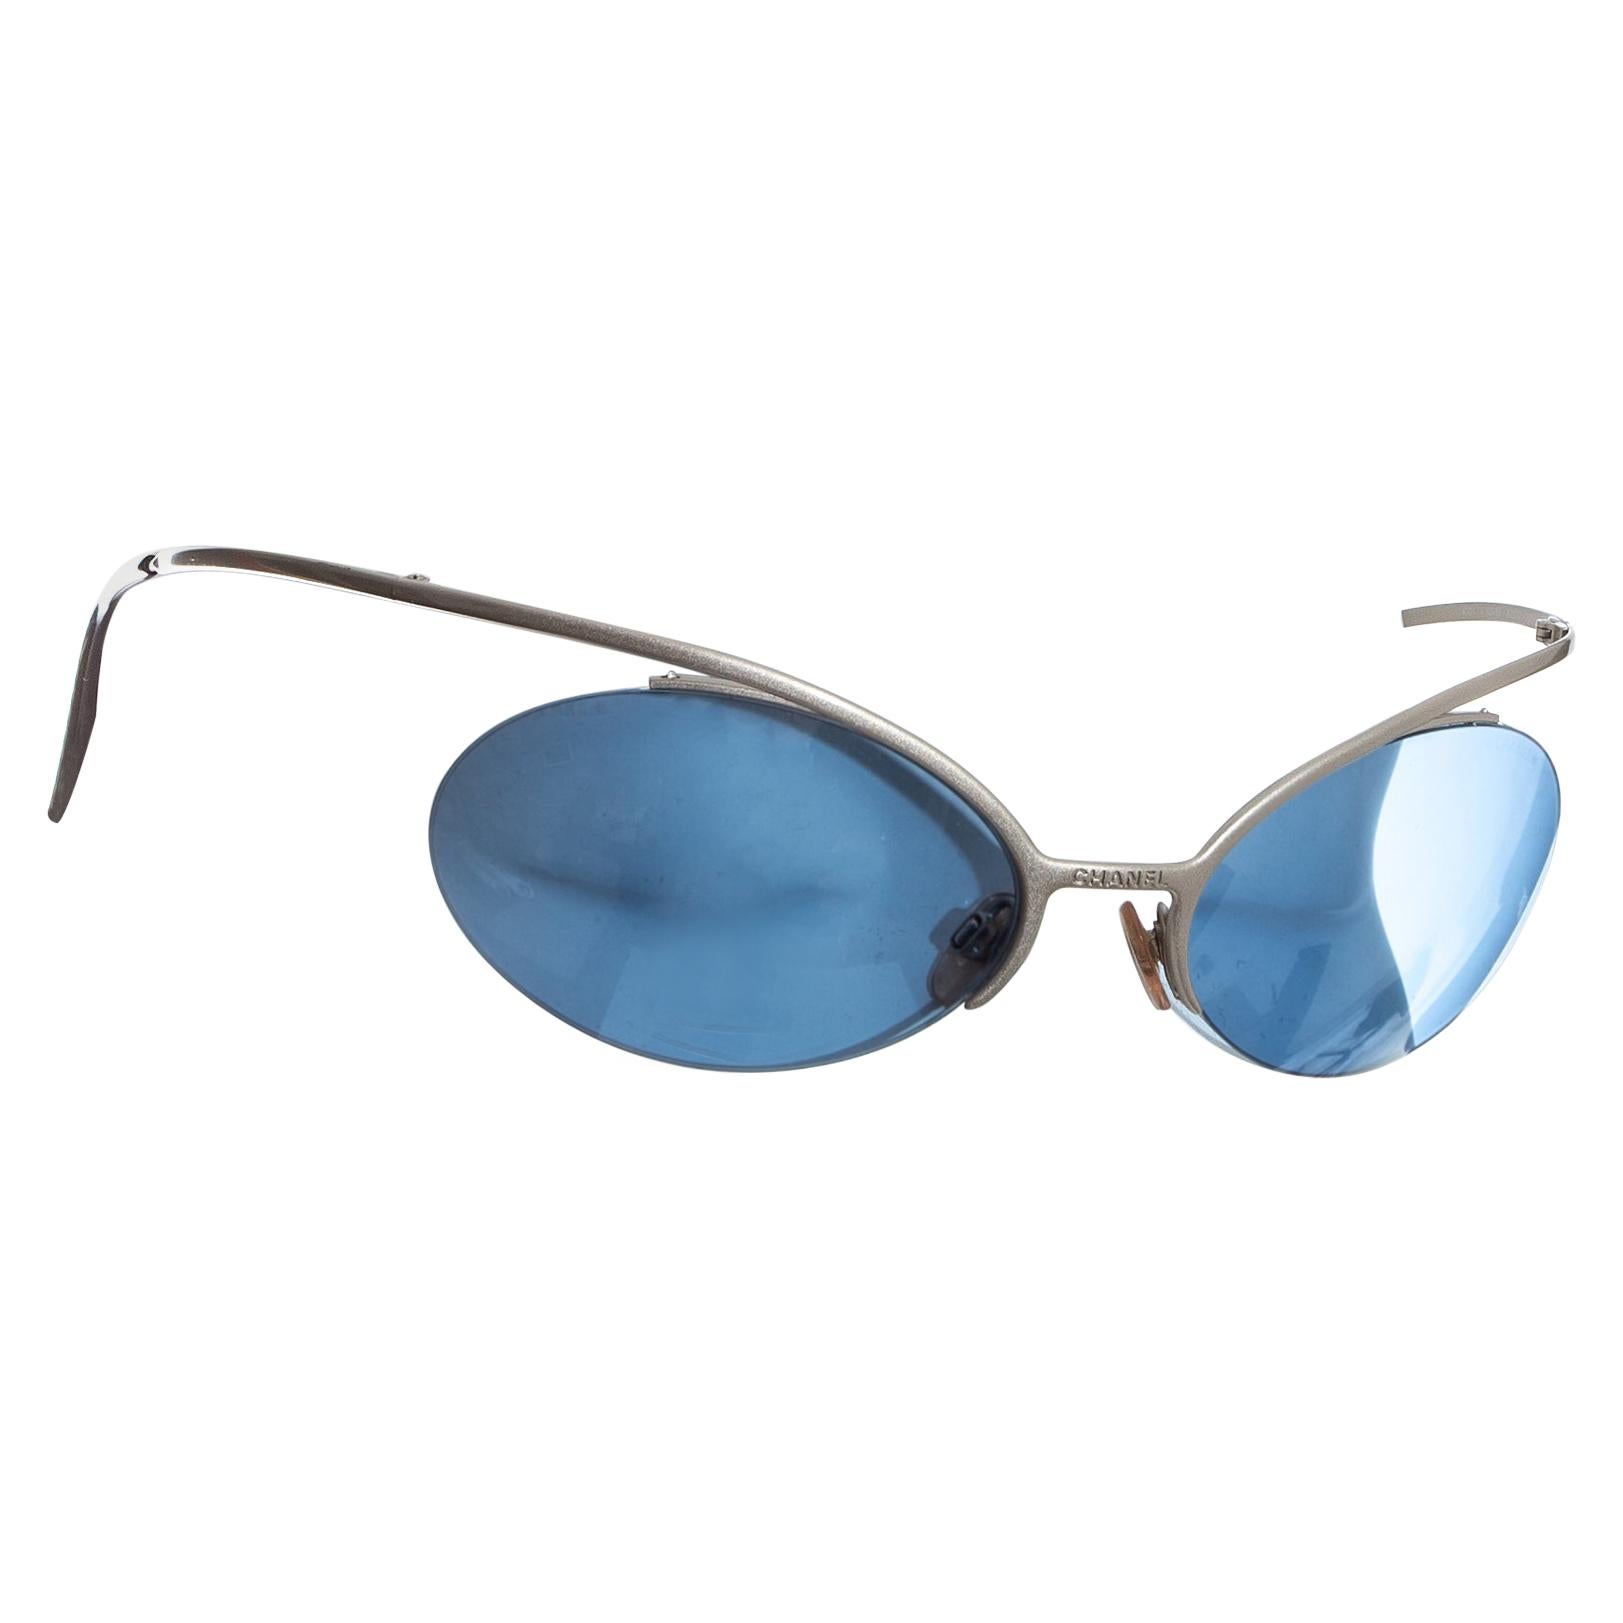 Chanel by Karl Lagerfeld blue lens silver sunglasses, ss 2000 For Sale